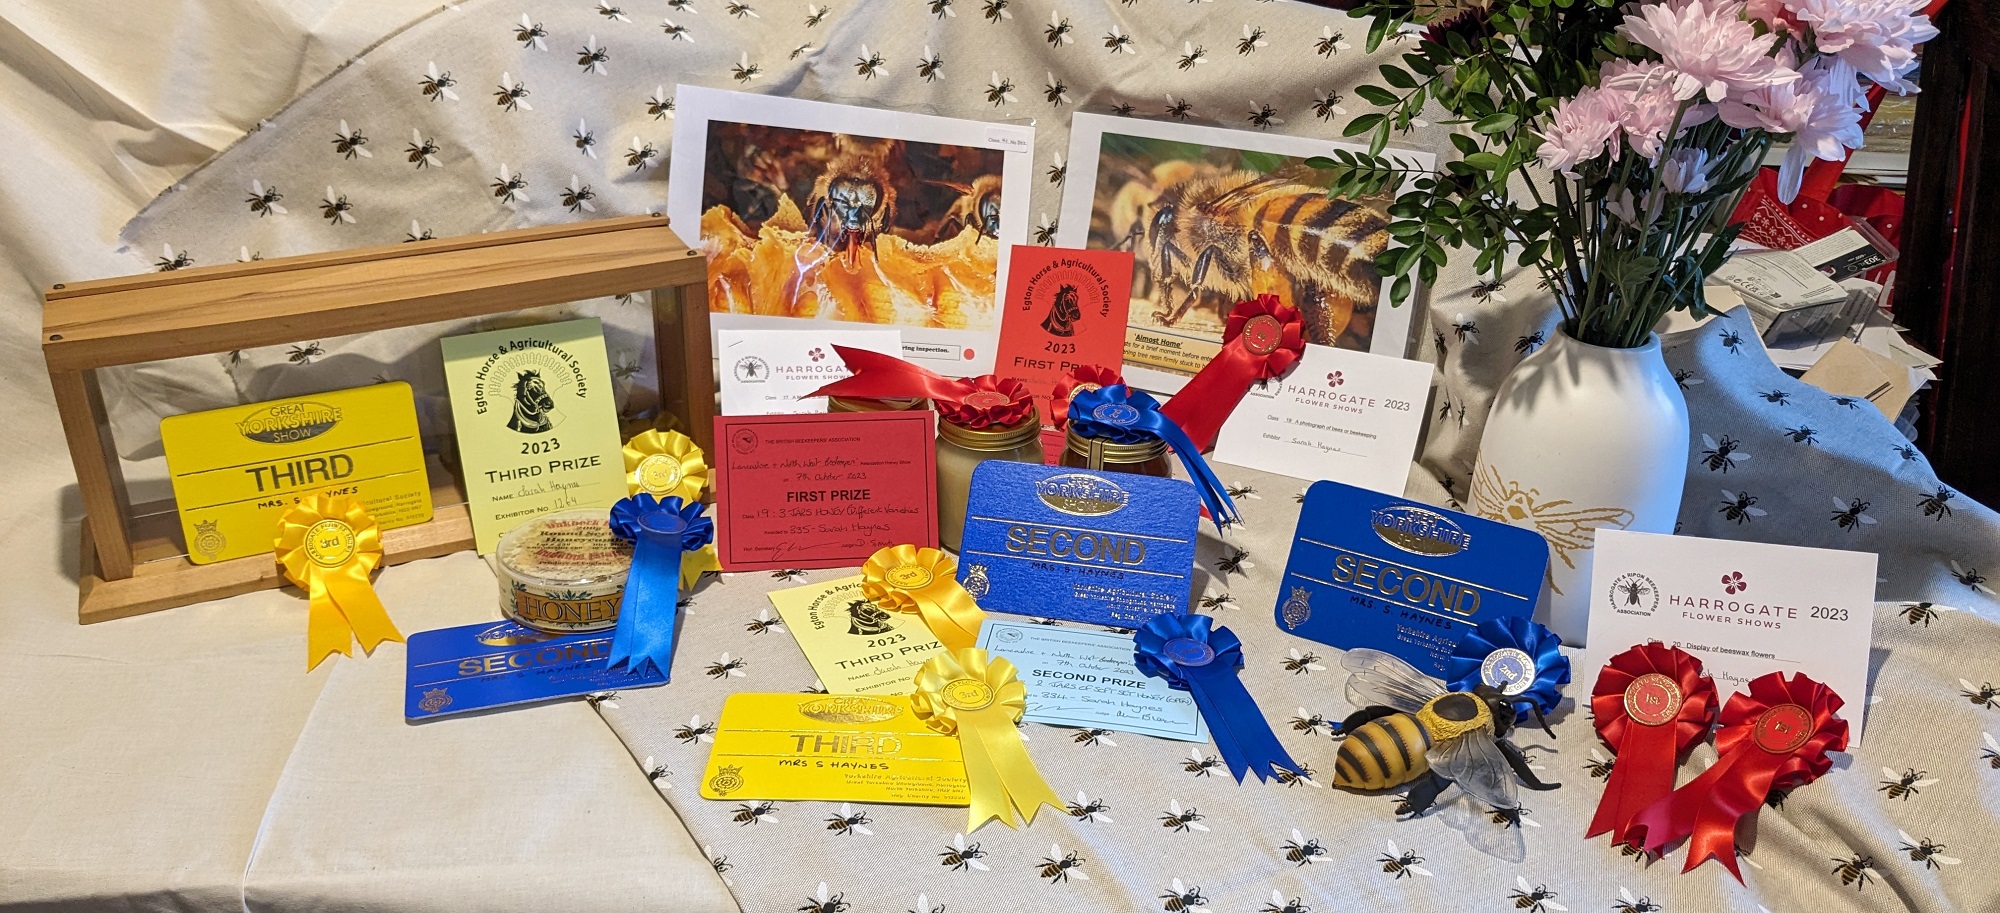 Oakbeck Bees Honey scoops the awards at the 2023 Honey Show, including six prizes for Rudding Estate Honey!